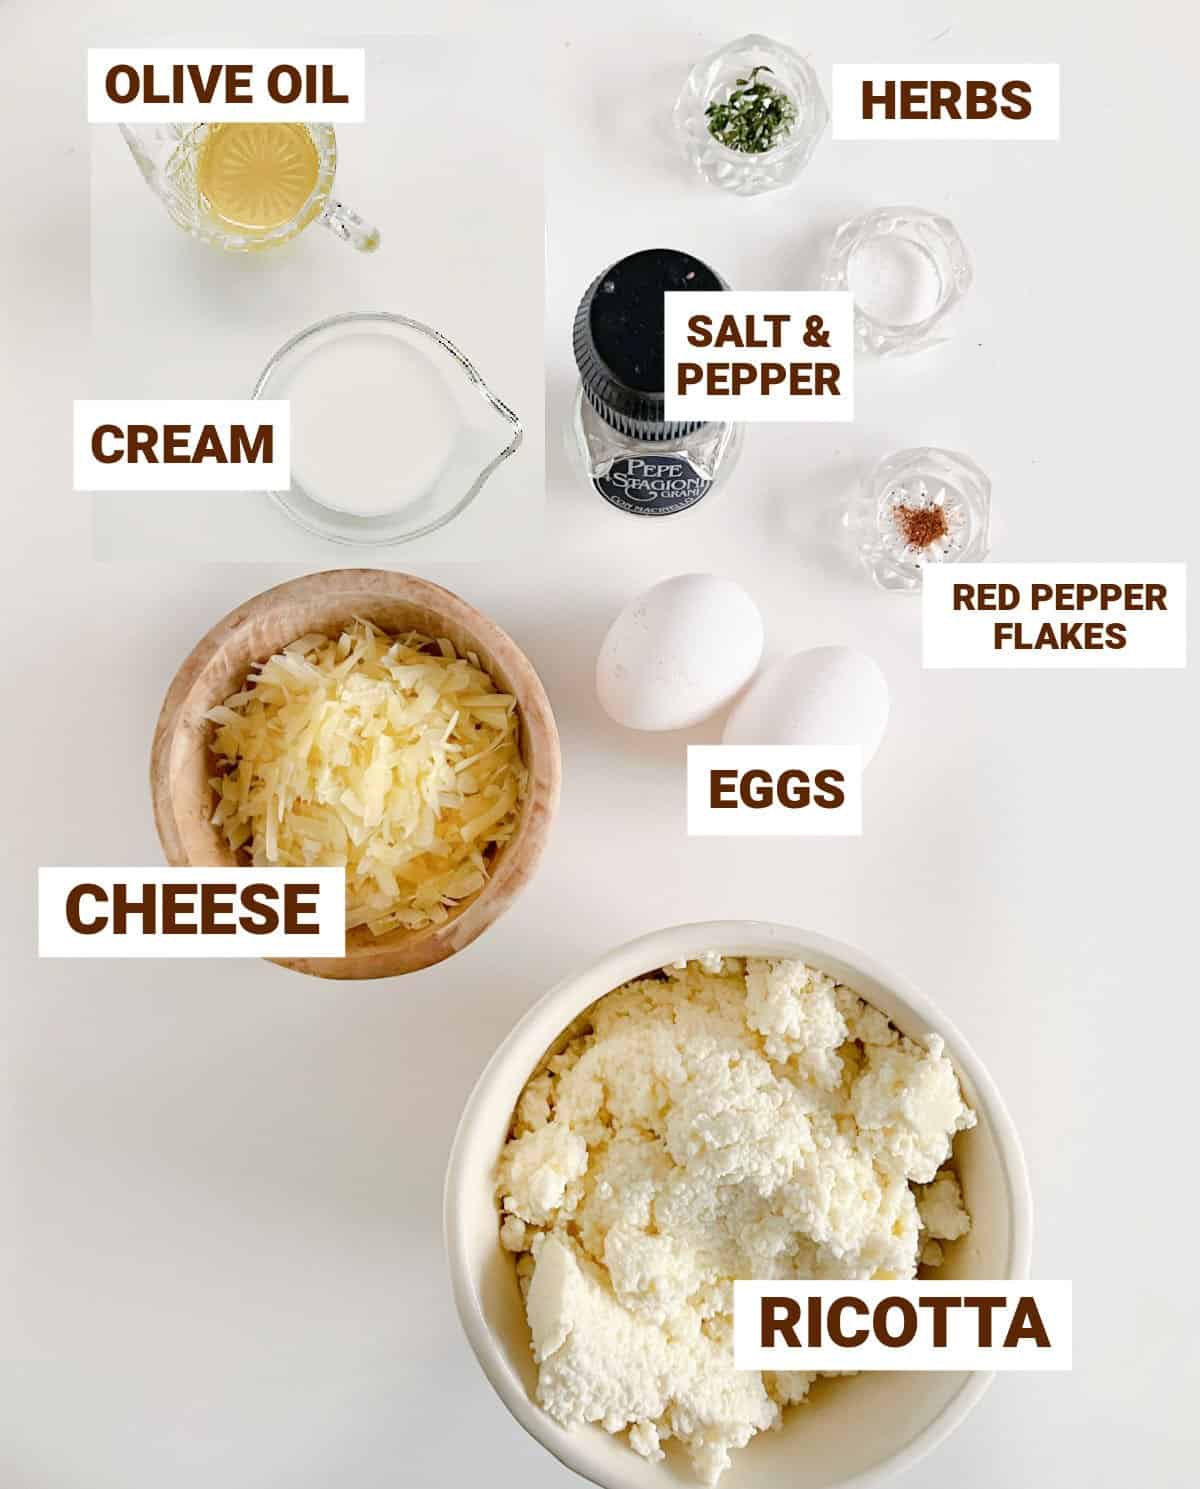 White surface with bowls containing ingredients for baked ricotta including cheese, oil, eggs, flavorings, cream, herbs.